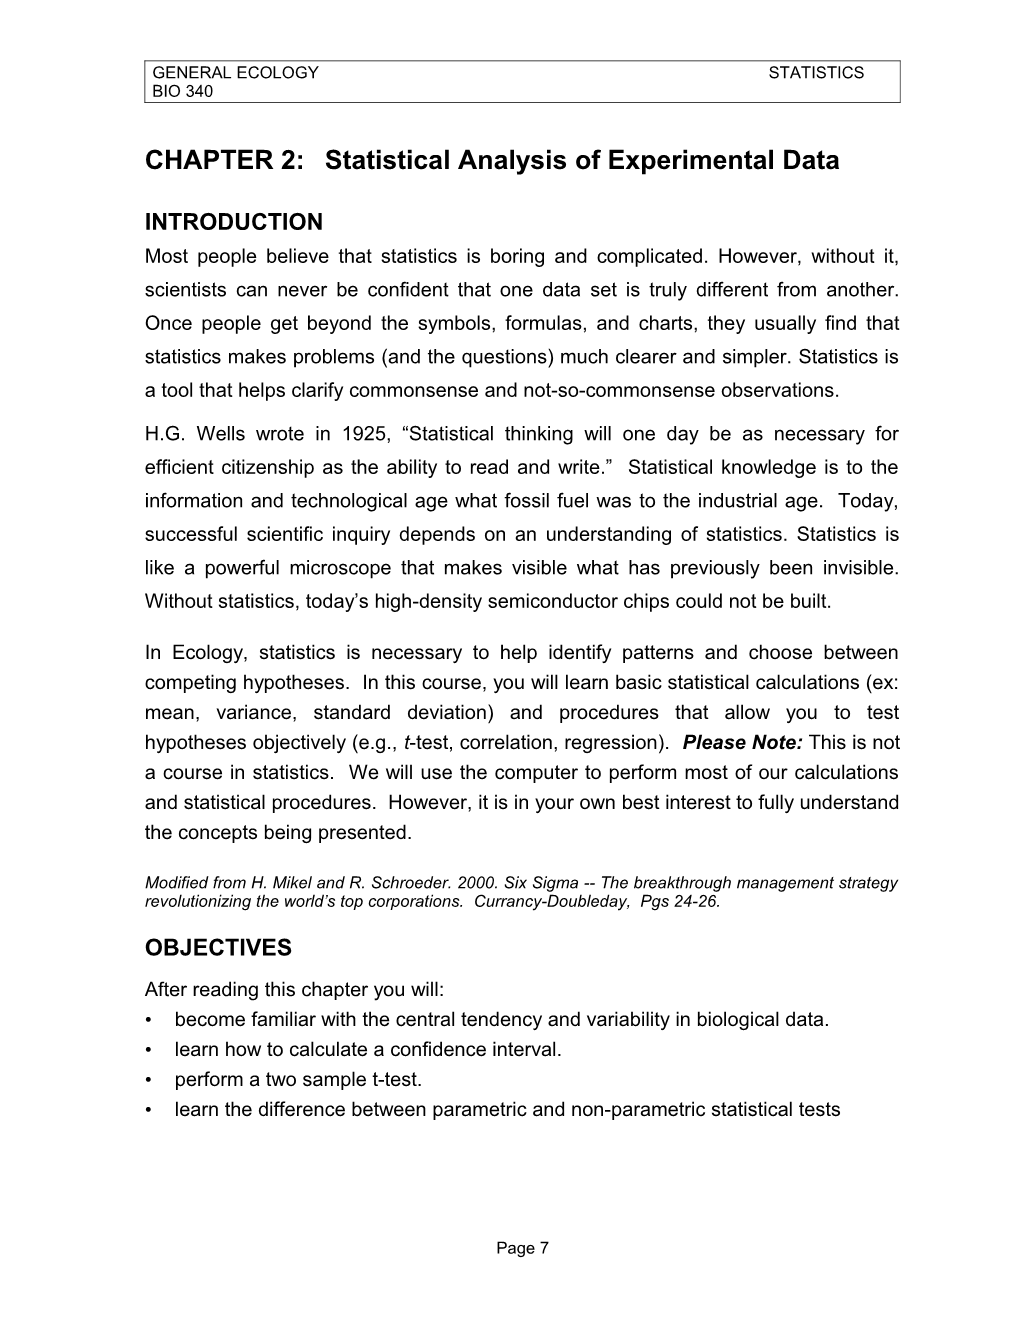 Chapter 2: Statistical Analysis of Experimental Data